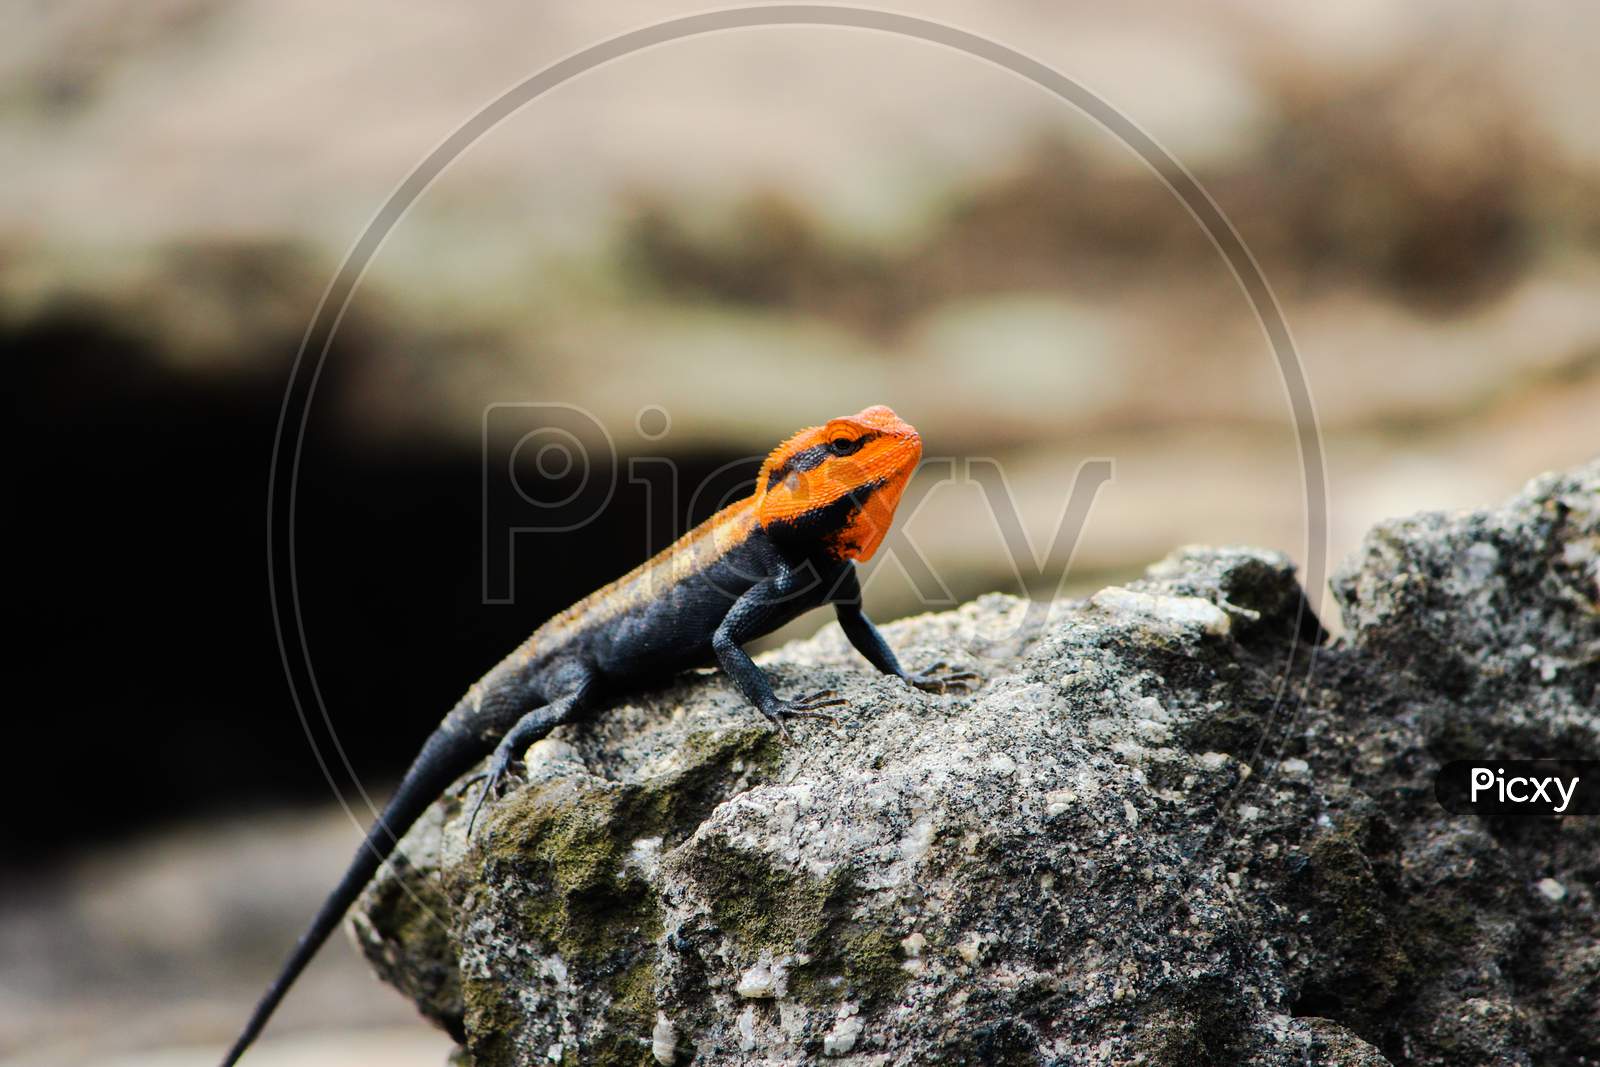 An Orange Headed Lizard Standing And Giving A Handsome Pose Into The Camera